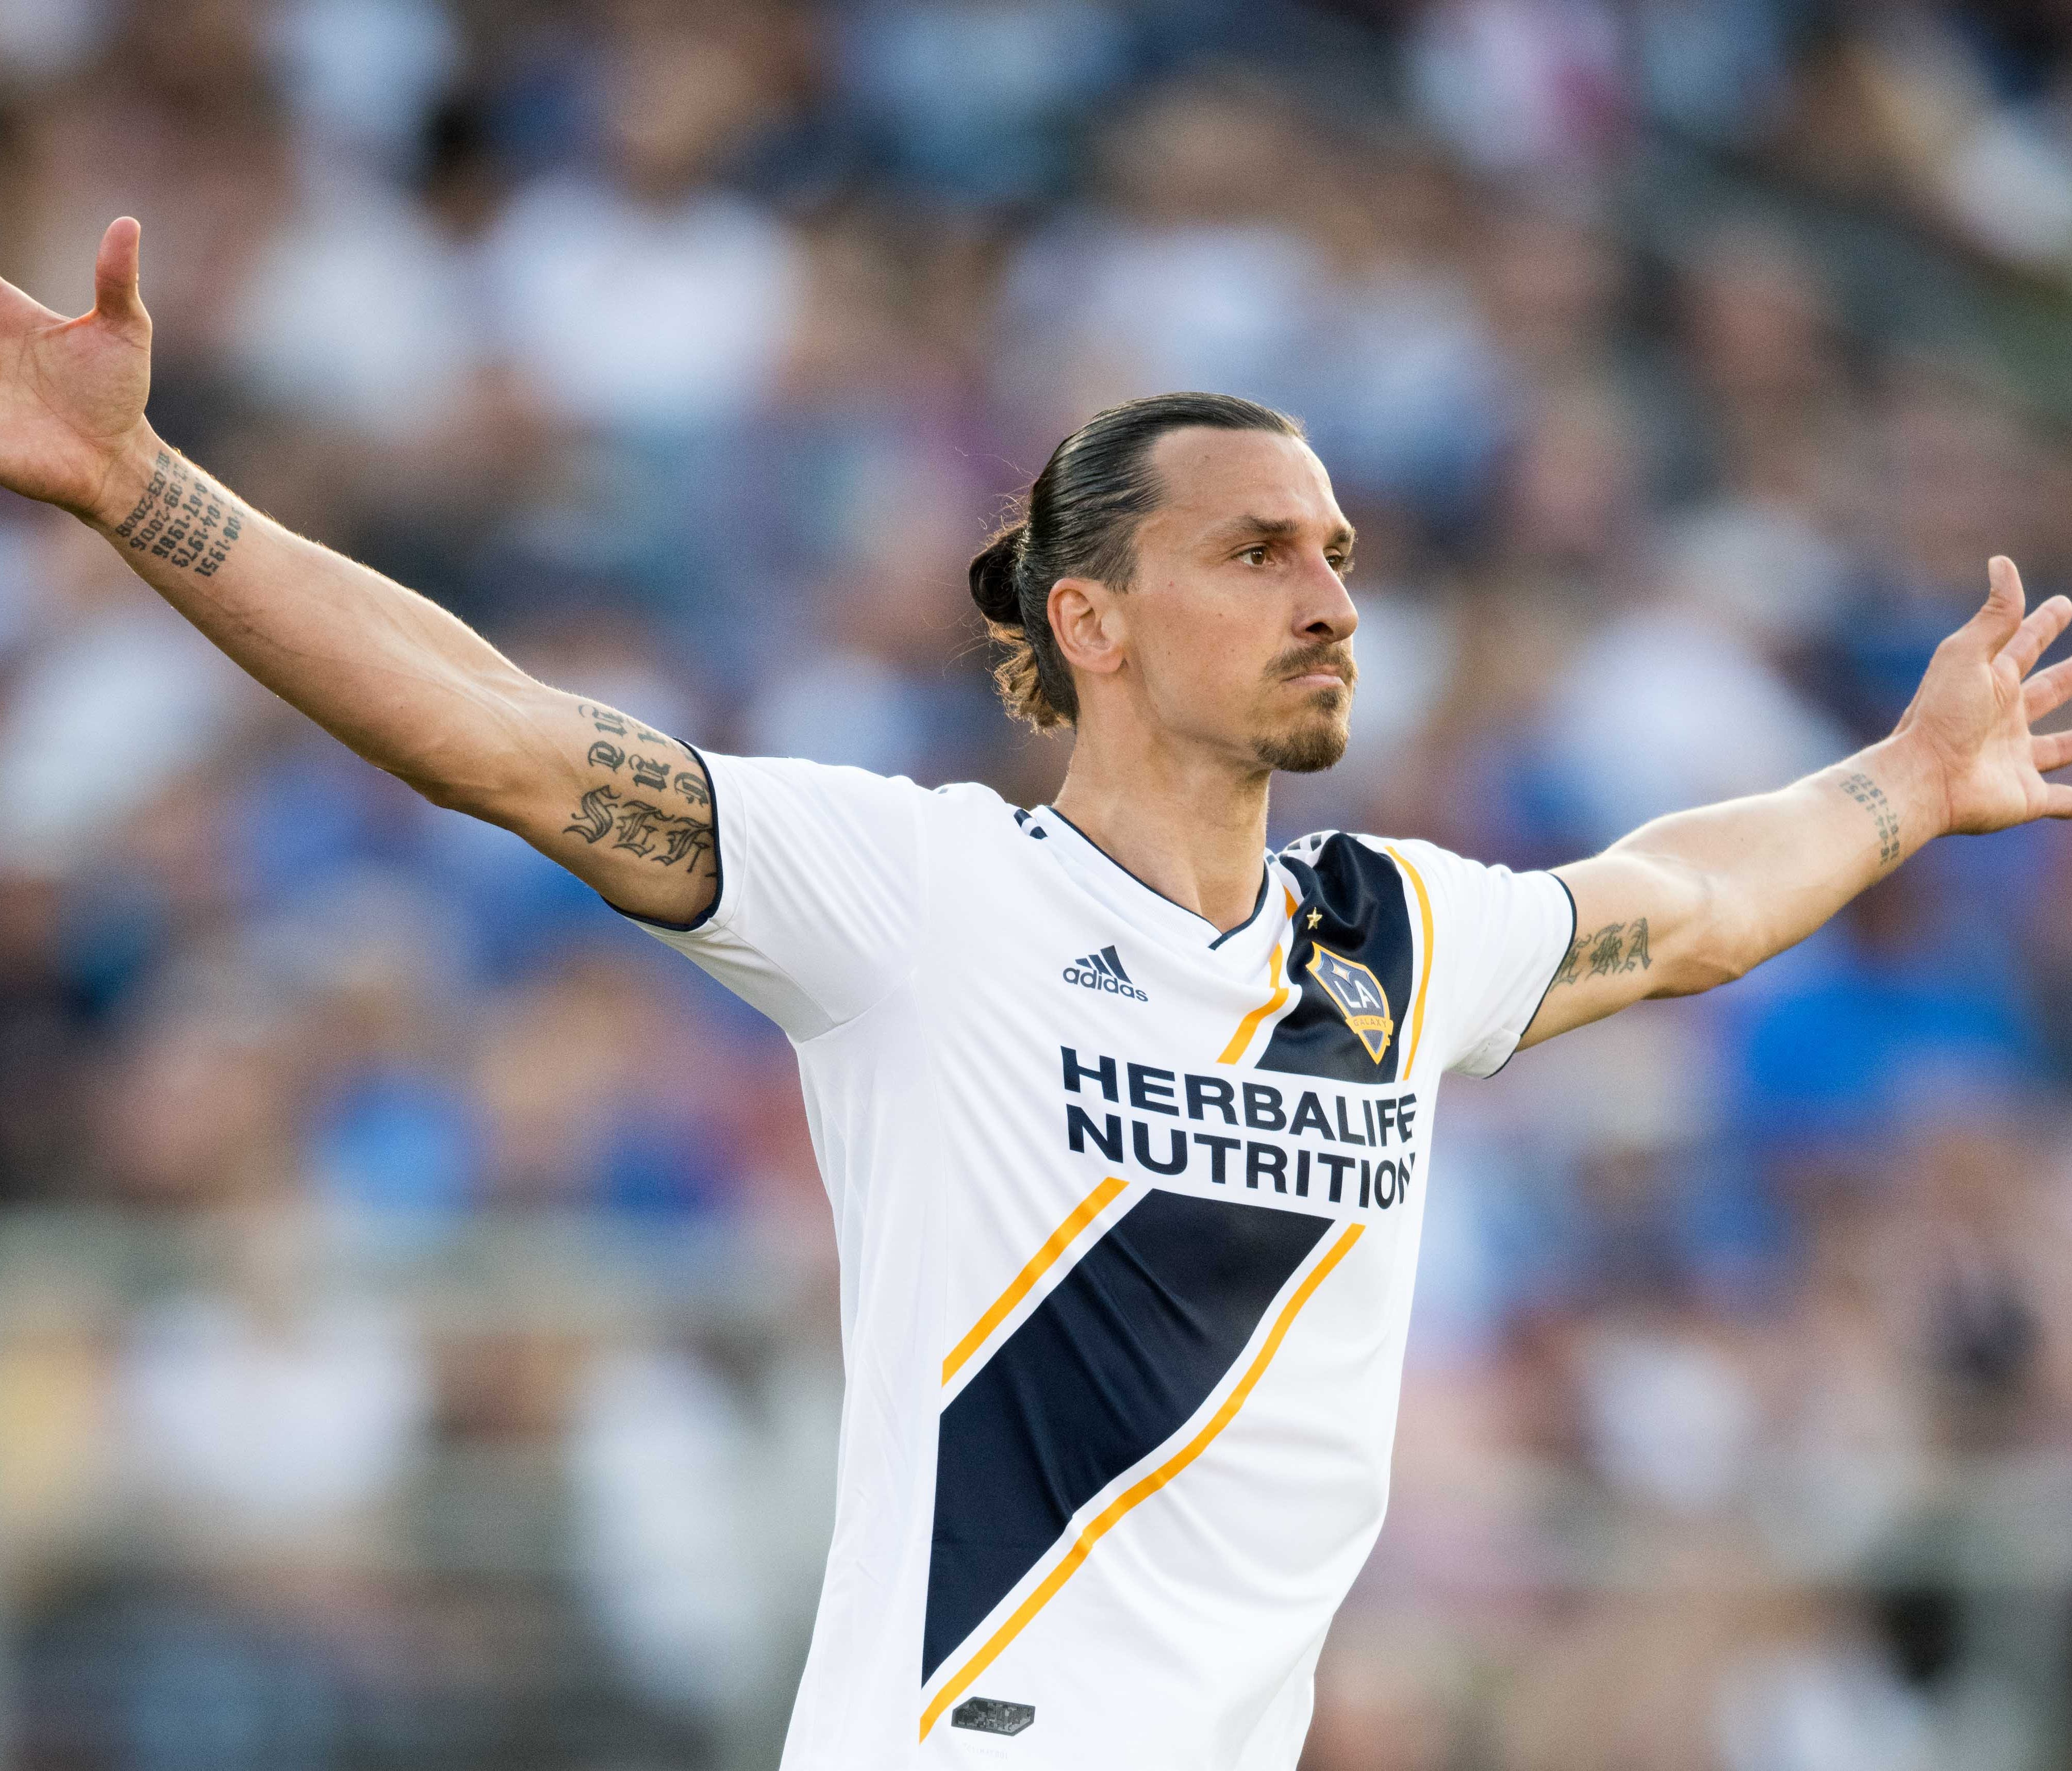 Zlatan Ibrahimovic has scored 12 goals in 15 games for the Galaxy.